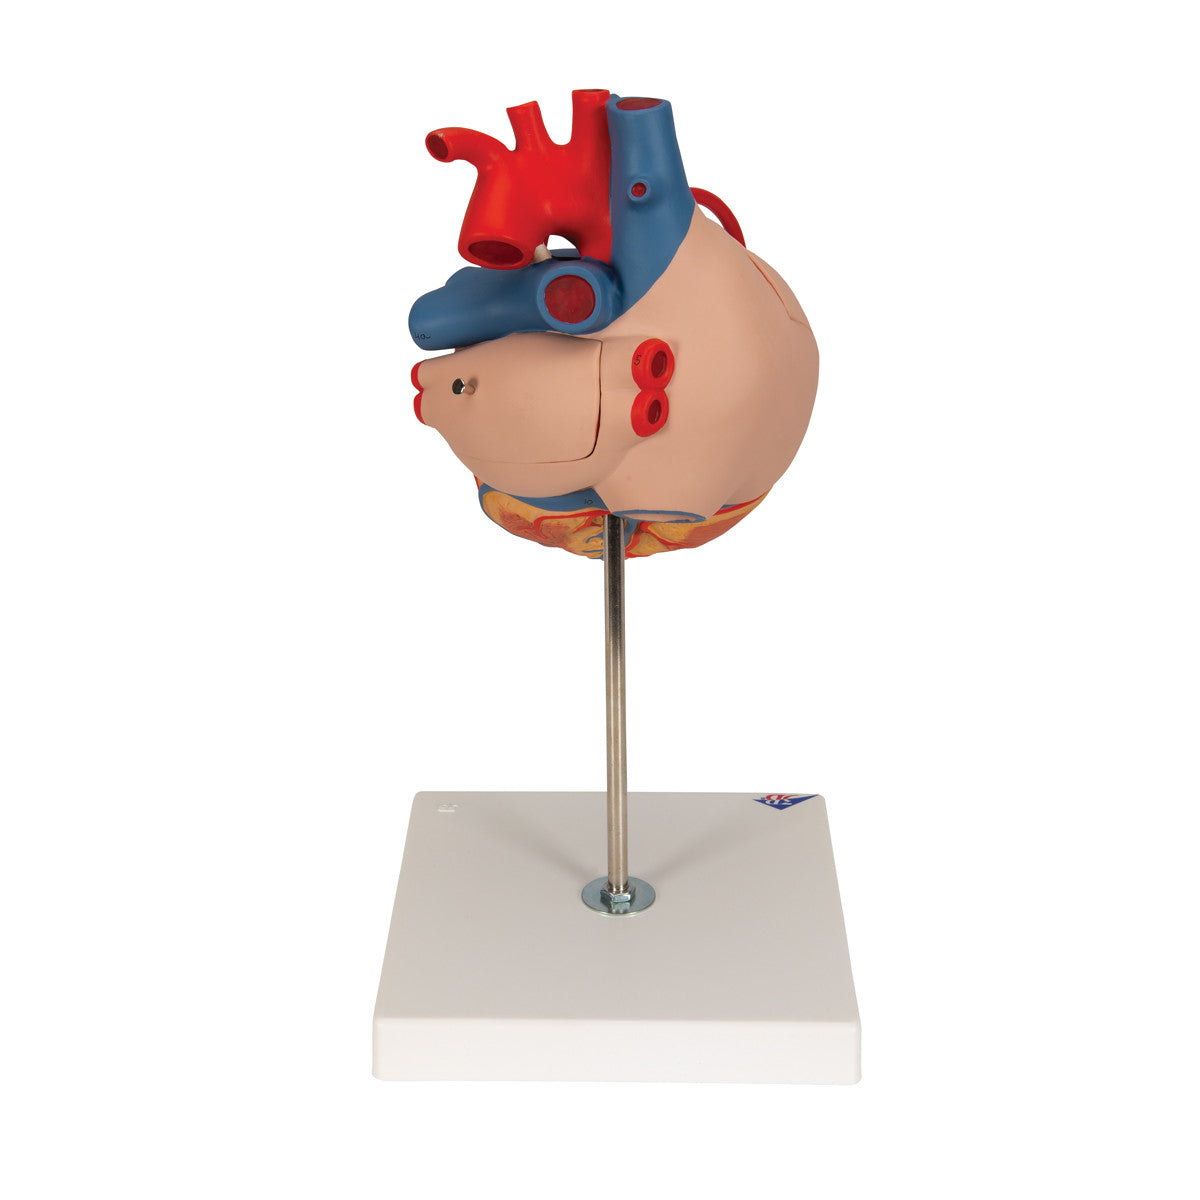 Heart Model with Bypass, 2 times life-size